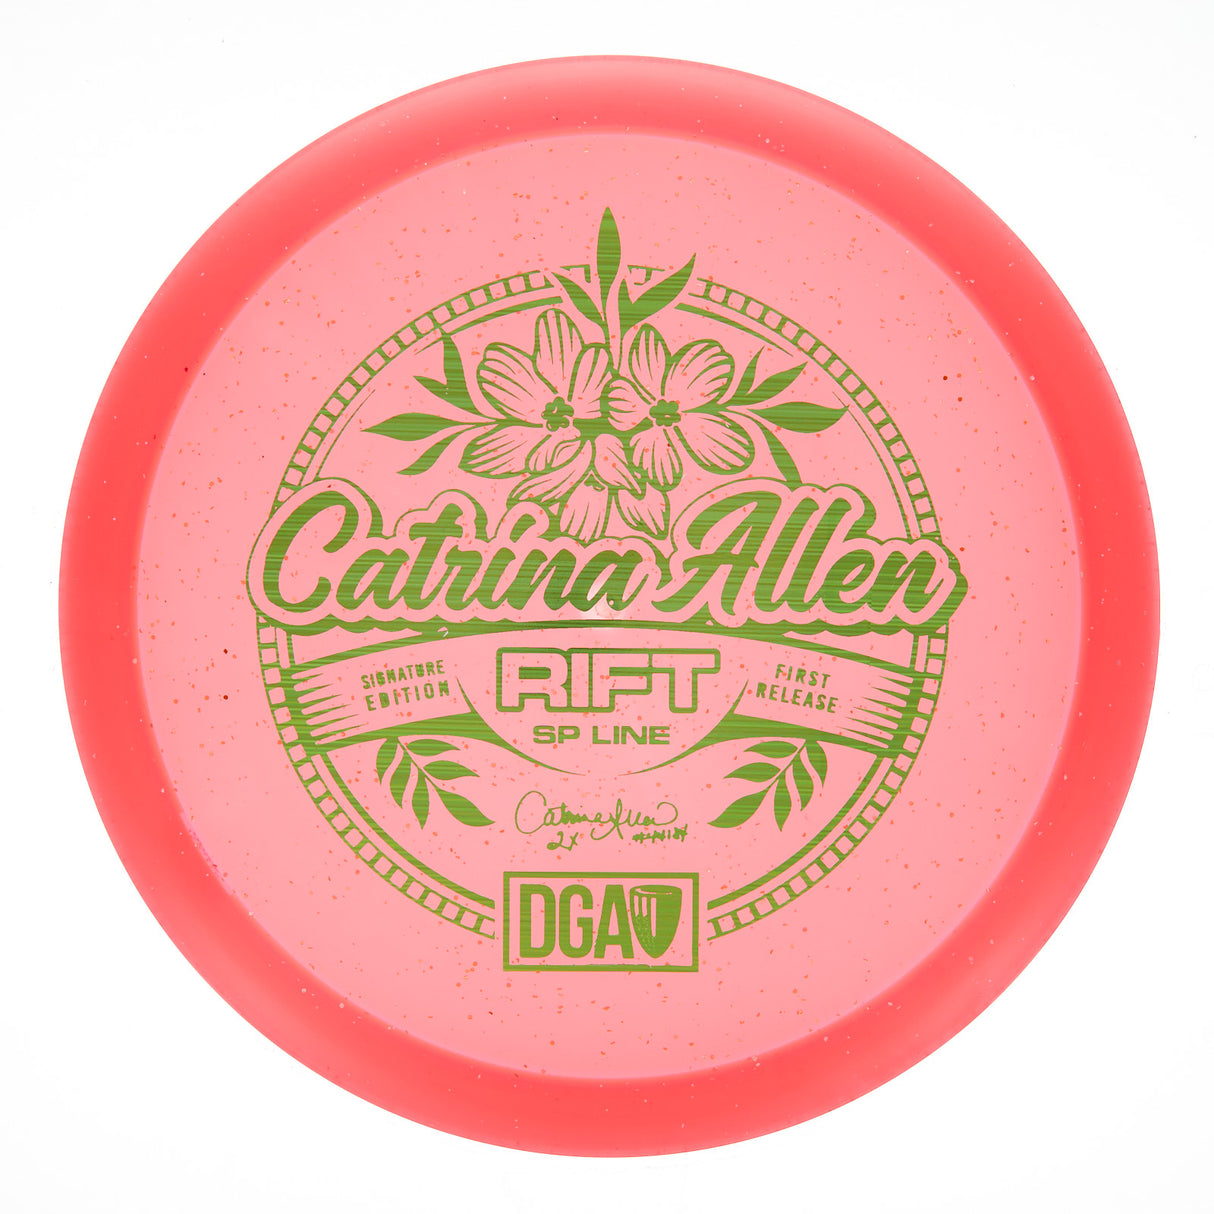 DGA Rift - Catrina Allen Signature Edition First Release SP Line 177g | Style 0002